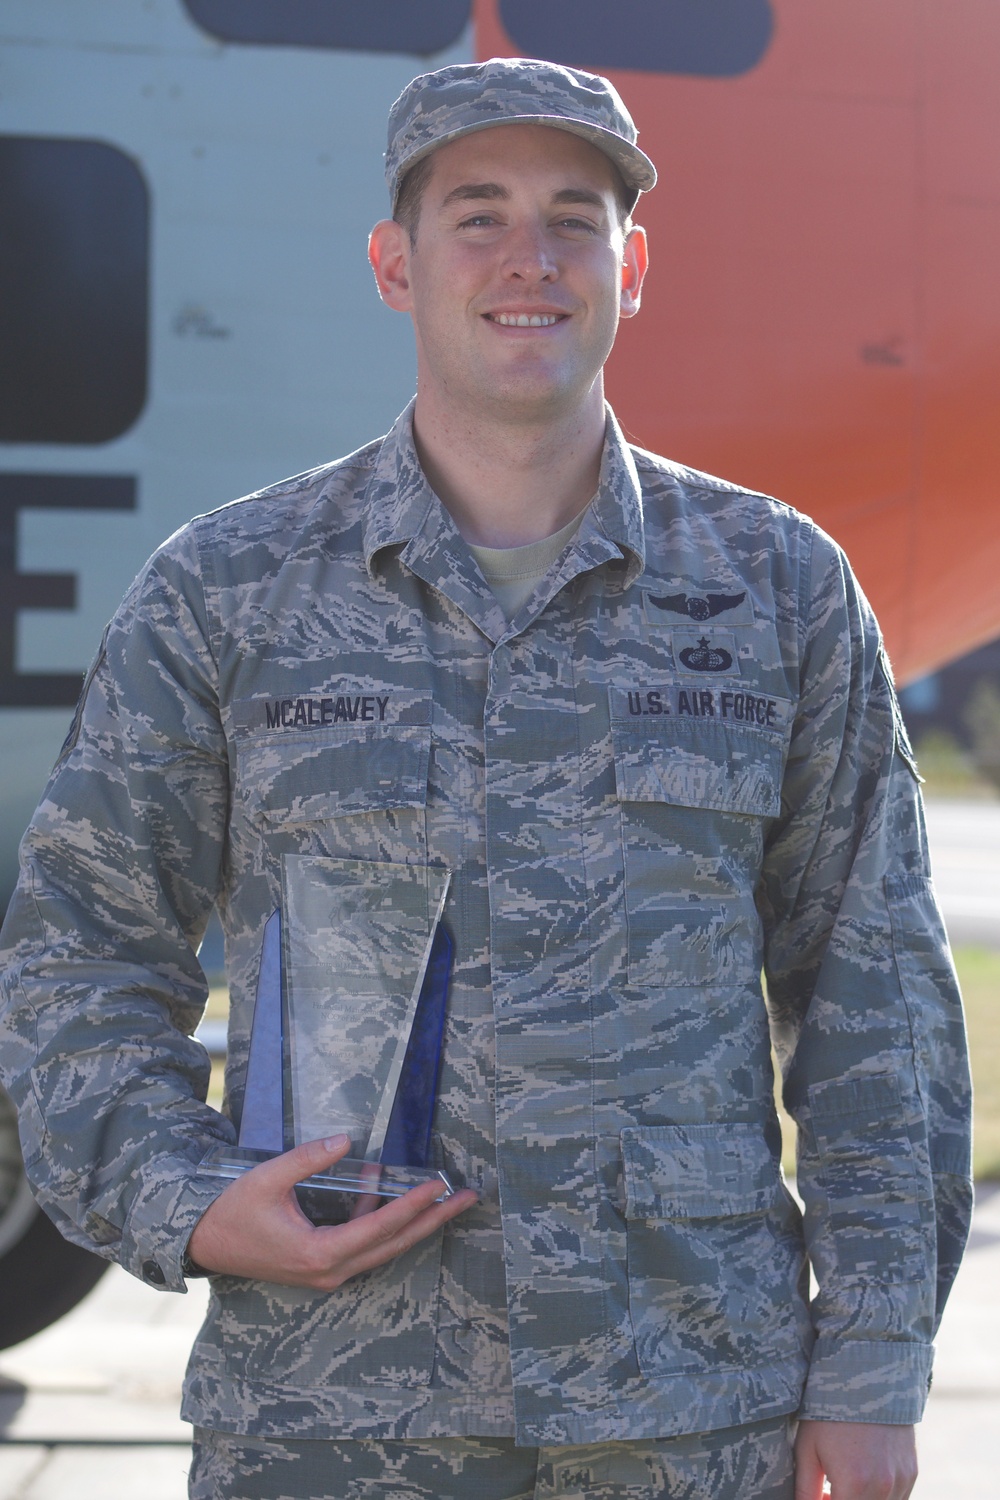 By the numbers: 176th Wing budget analyst wins nationwide honors